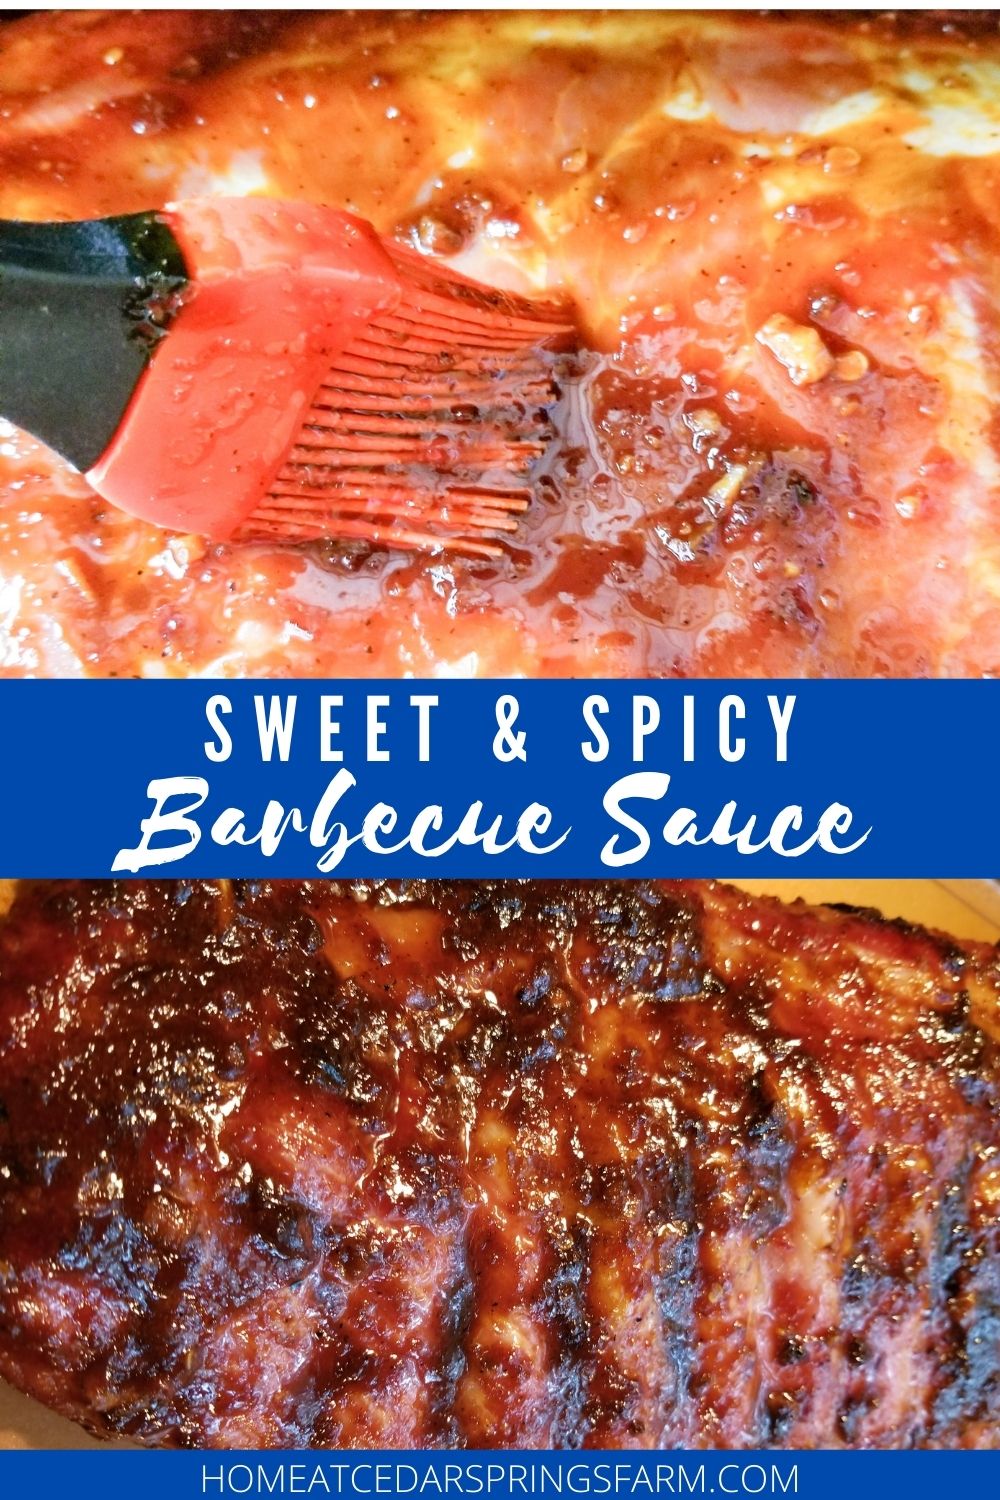 Sweet and Spicy BBQ Sauce shown on ribs with text overlay.